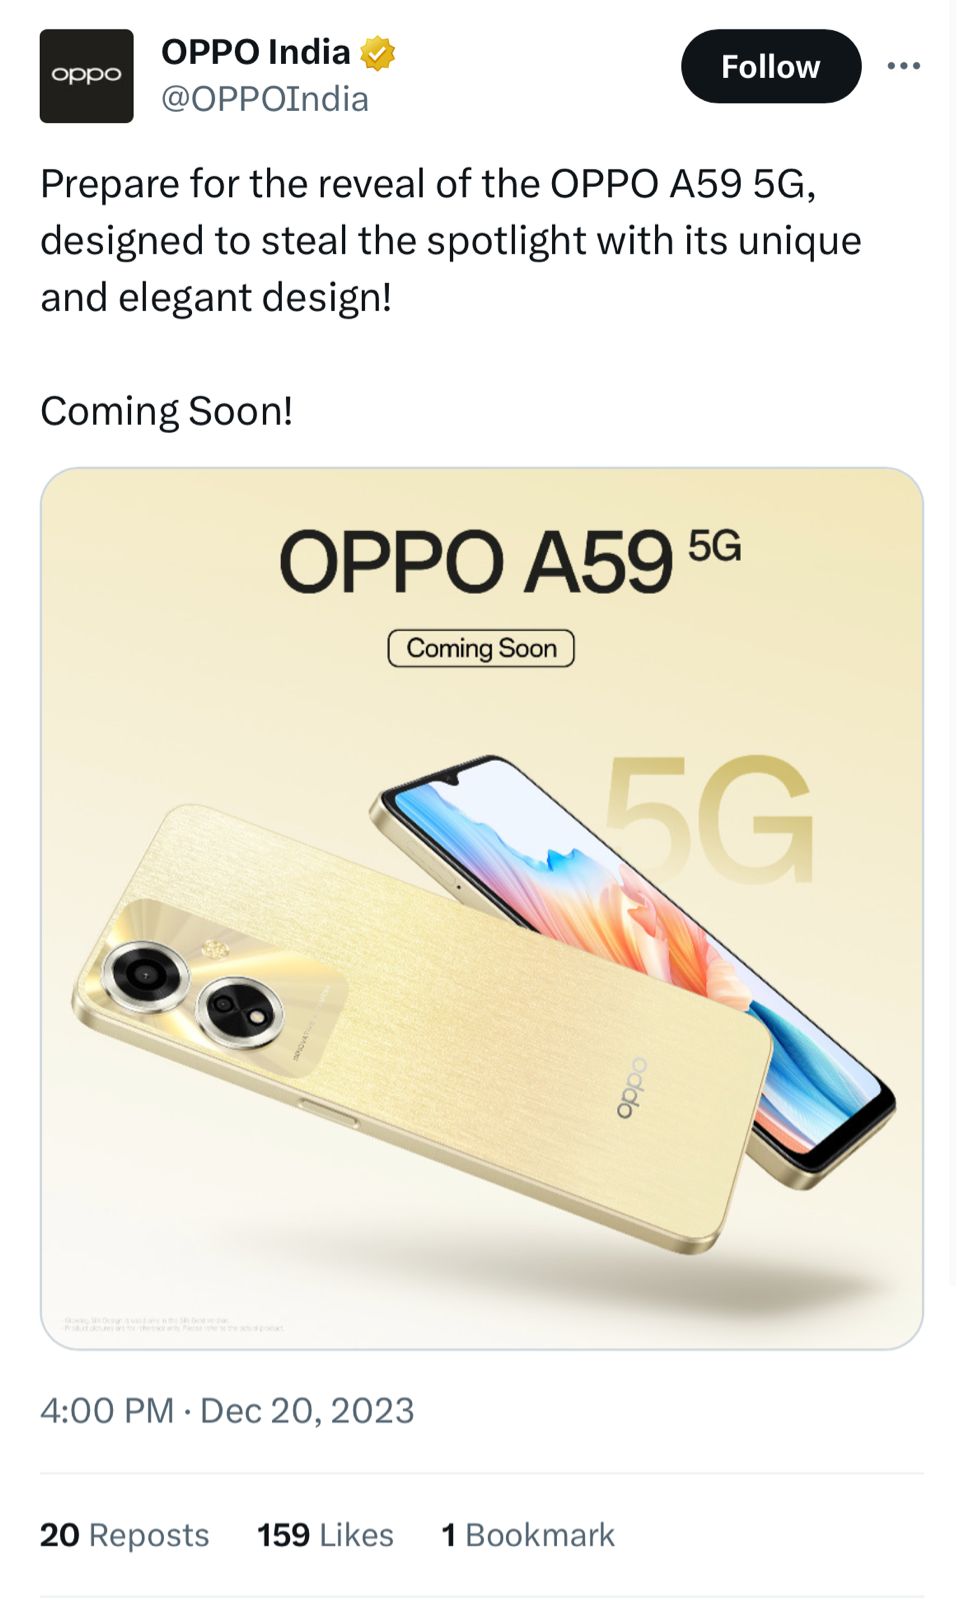 OPPO A59 5G: Launch and Expectations